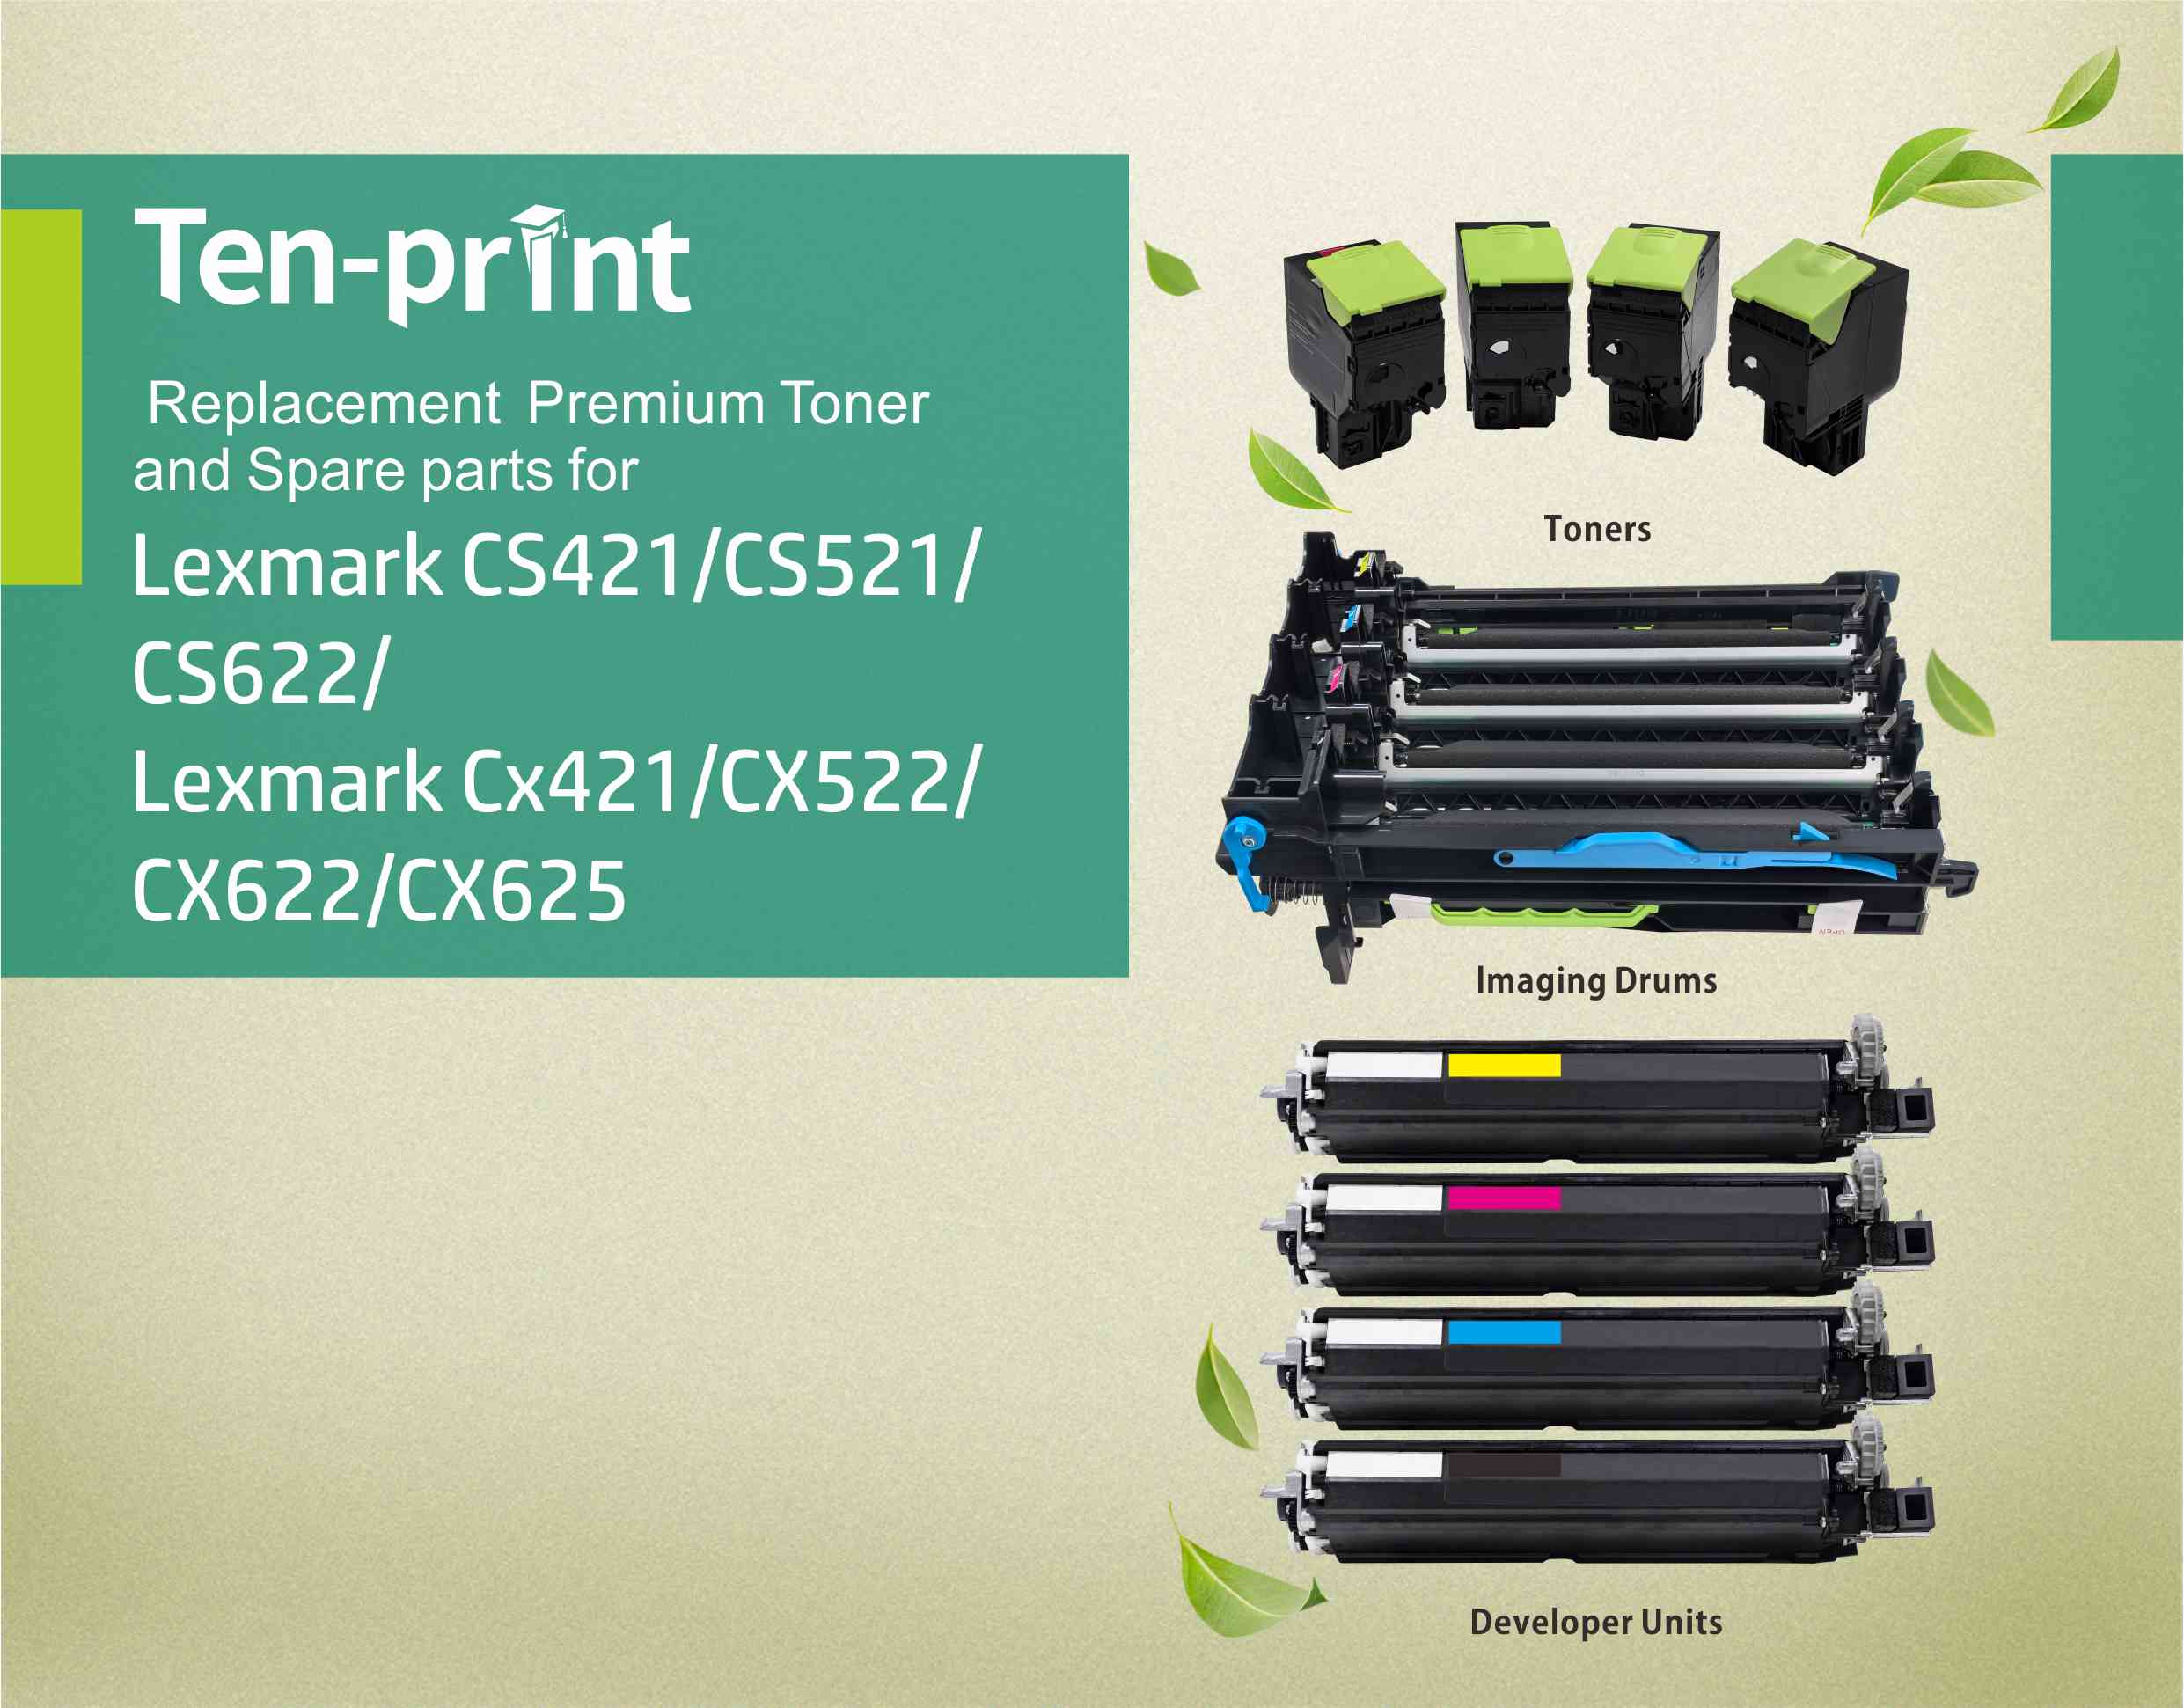 Ten-print Launches Remanufactured Consumables for Lexmark